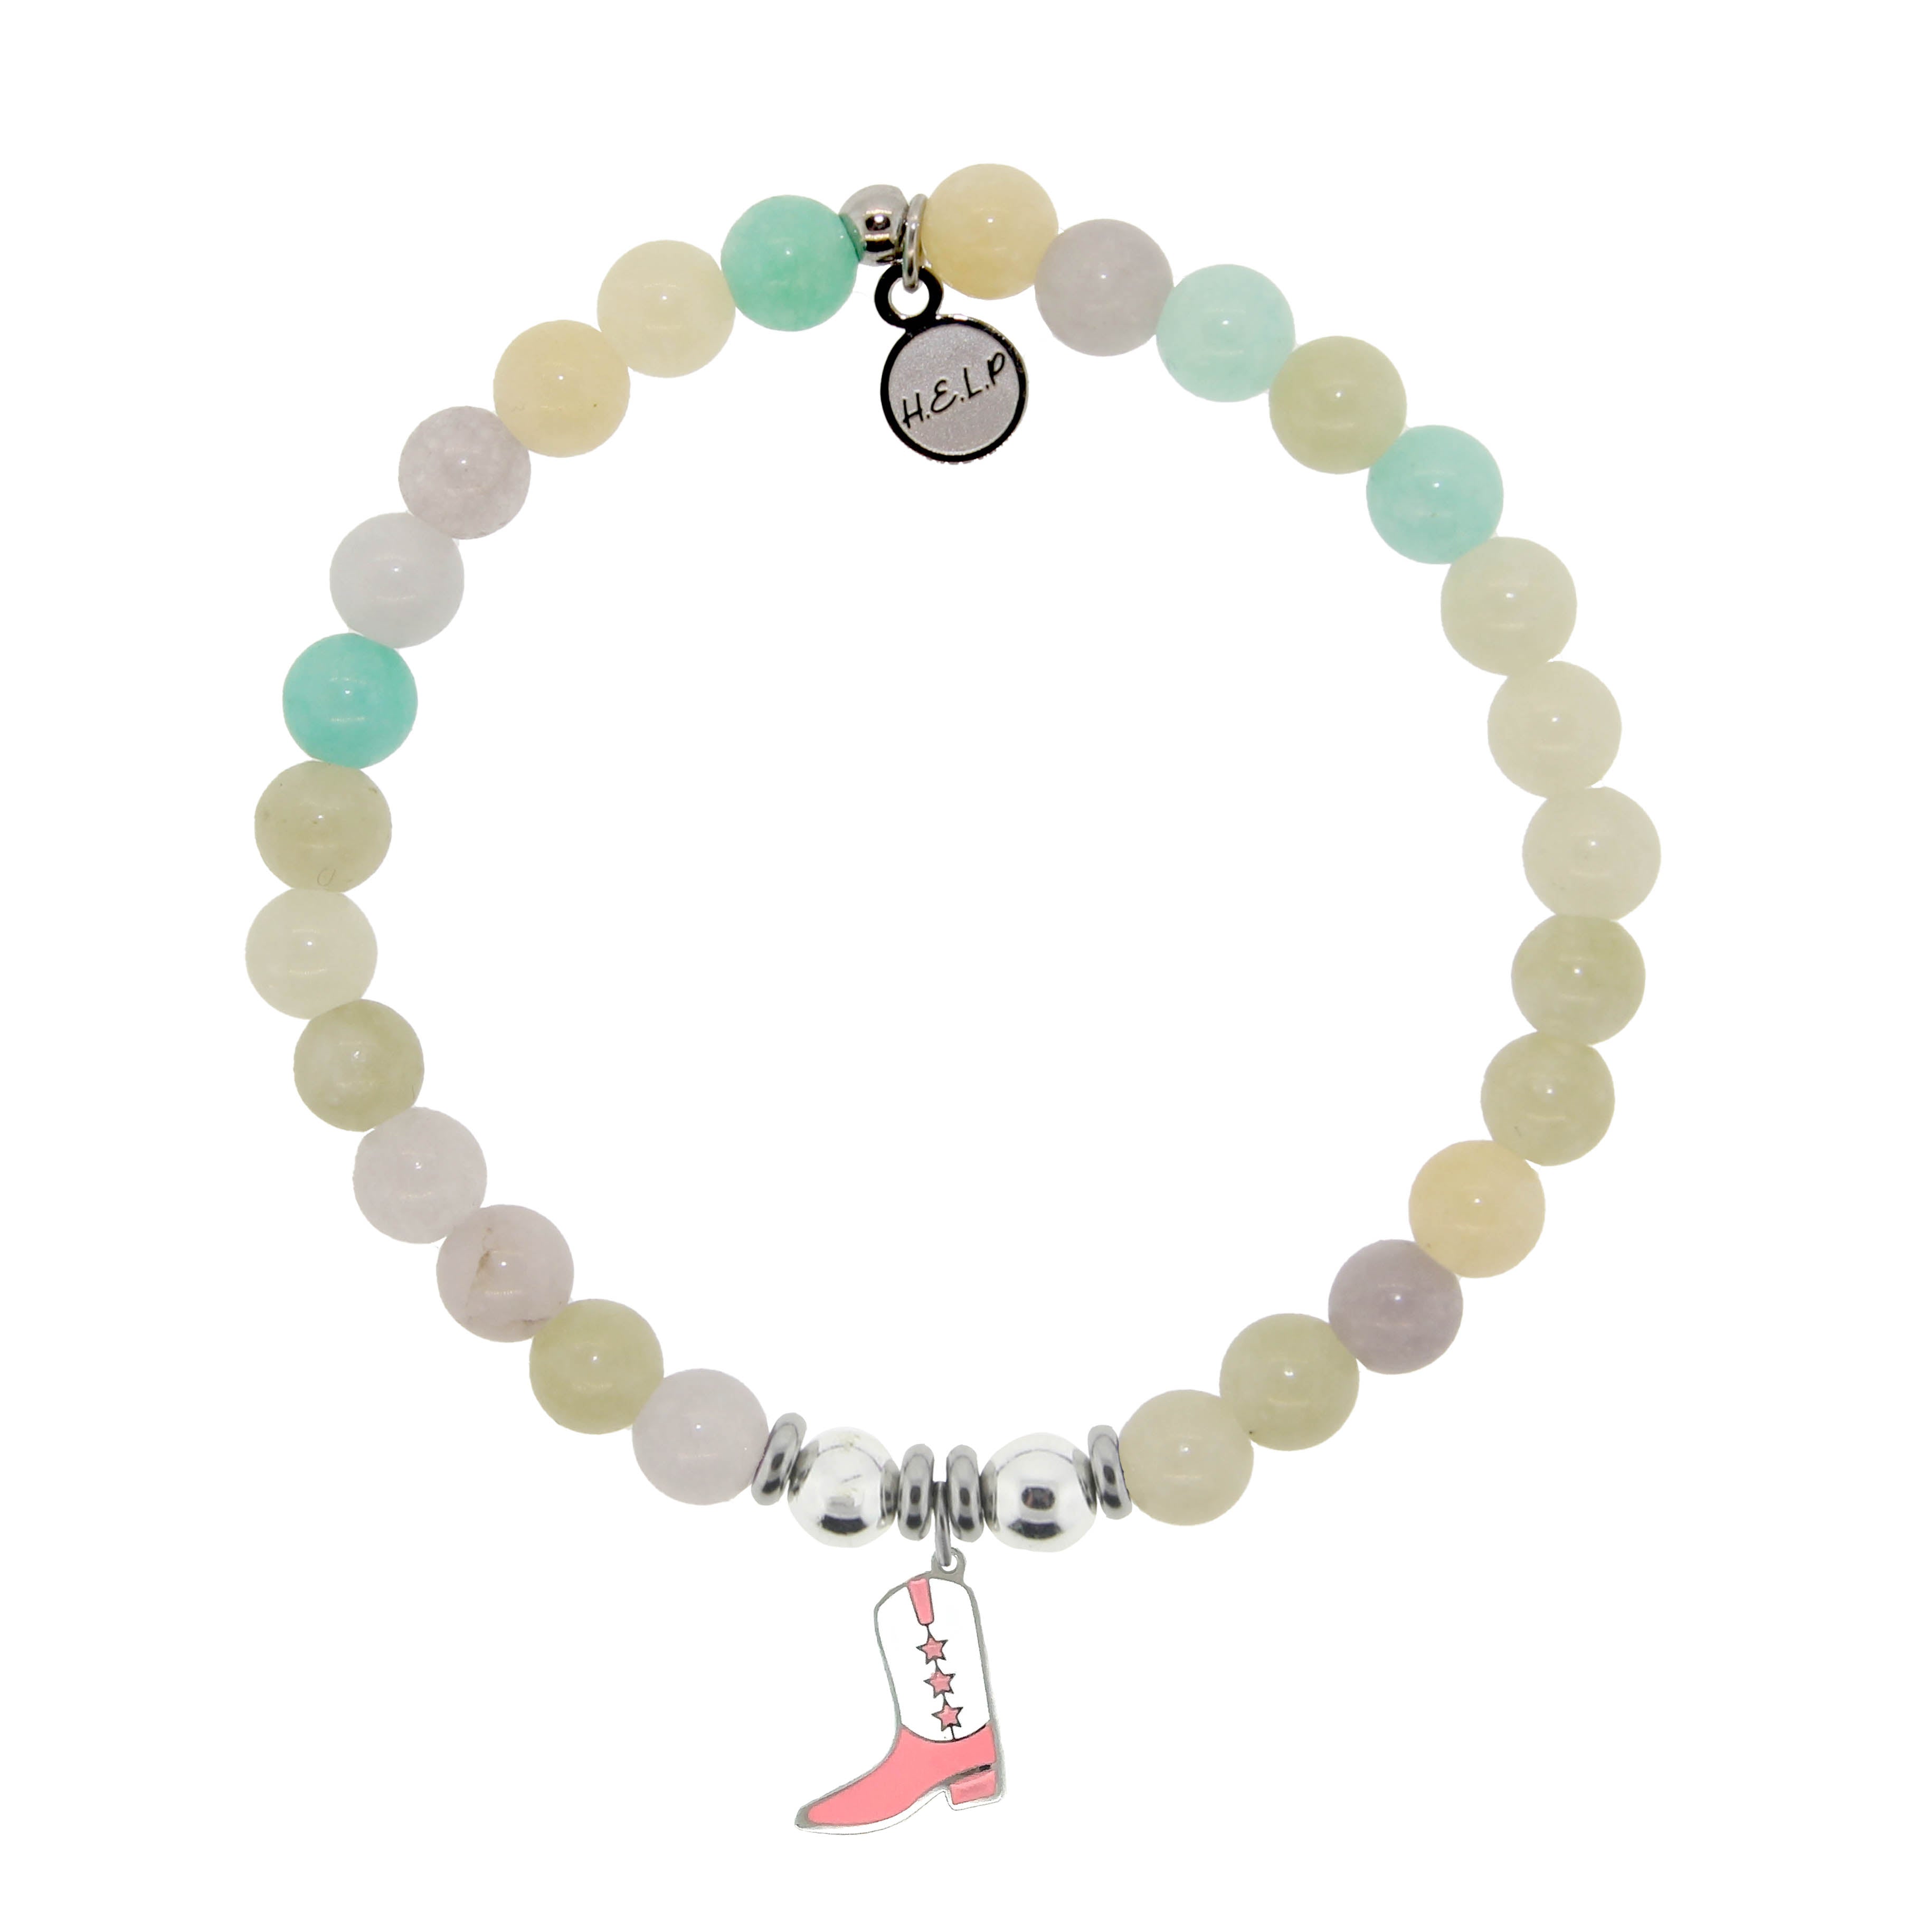 HELP by TJ Pink Cowboy Boot Charm with Green Yellow Jade Charity Bracelet